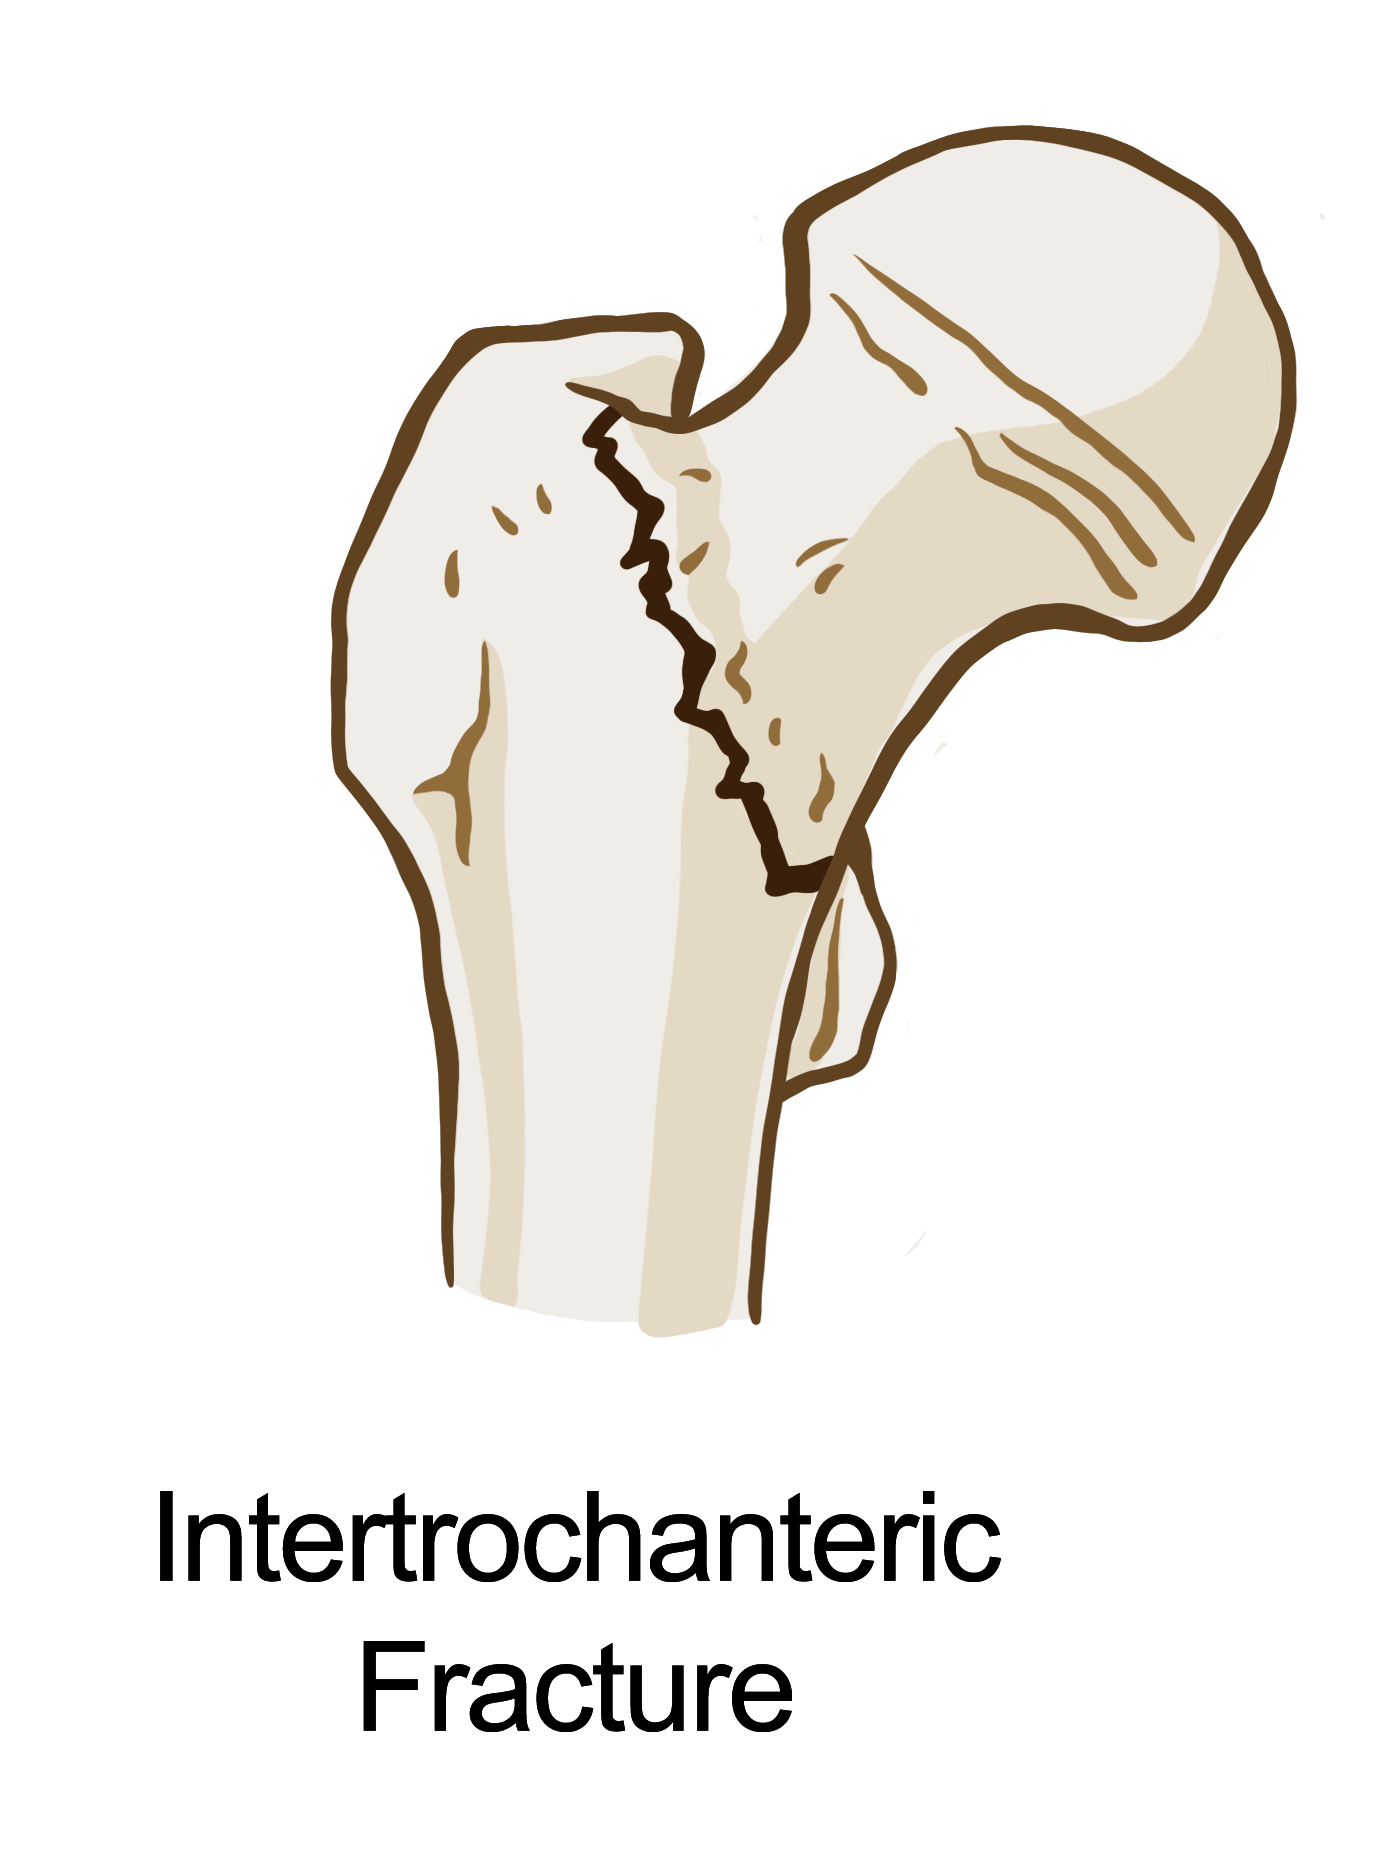 A diagram of a fracture running along the intertrochanteric area of the femur.